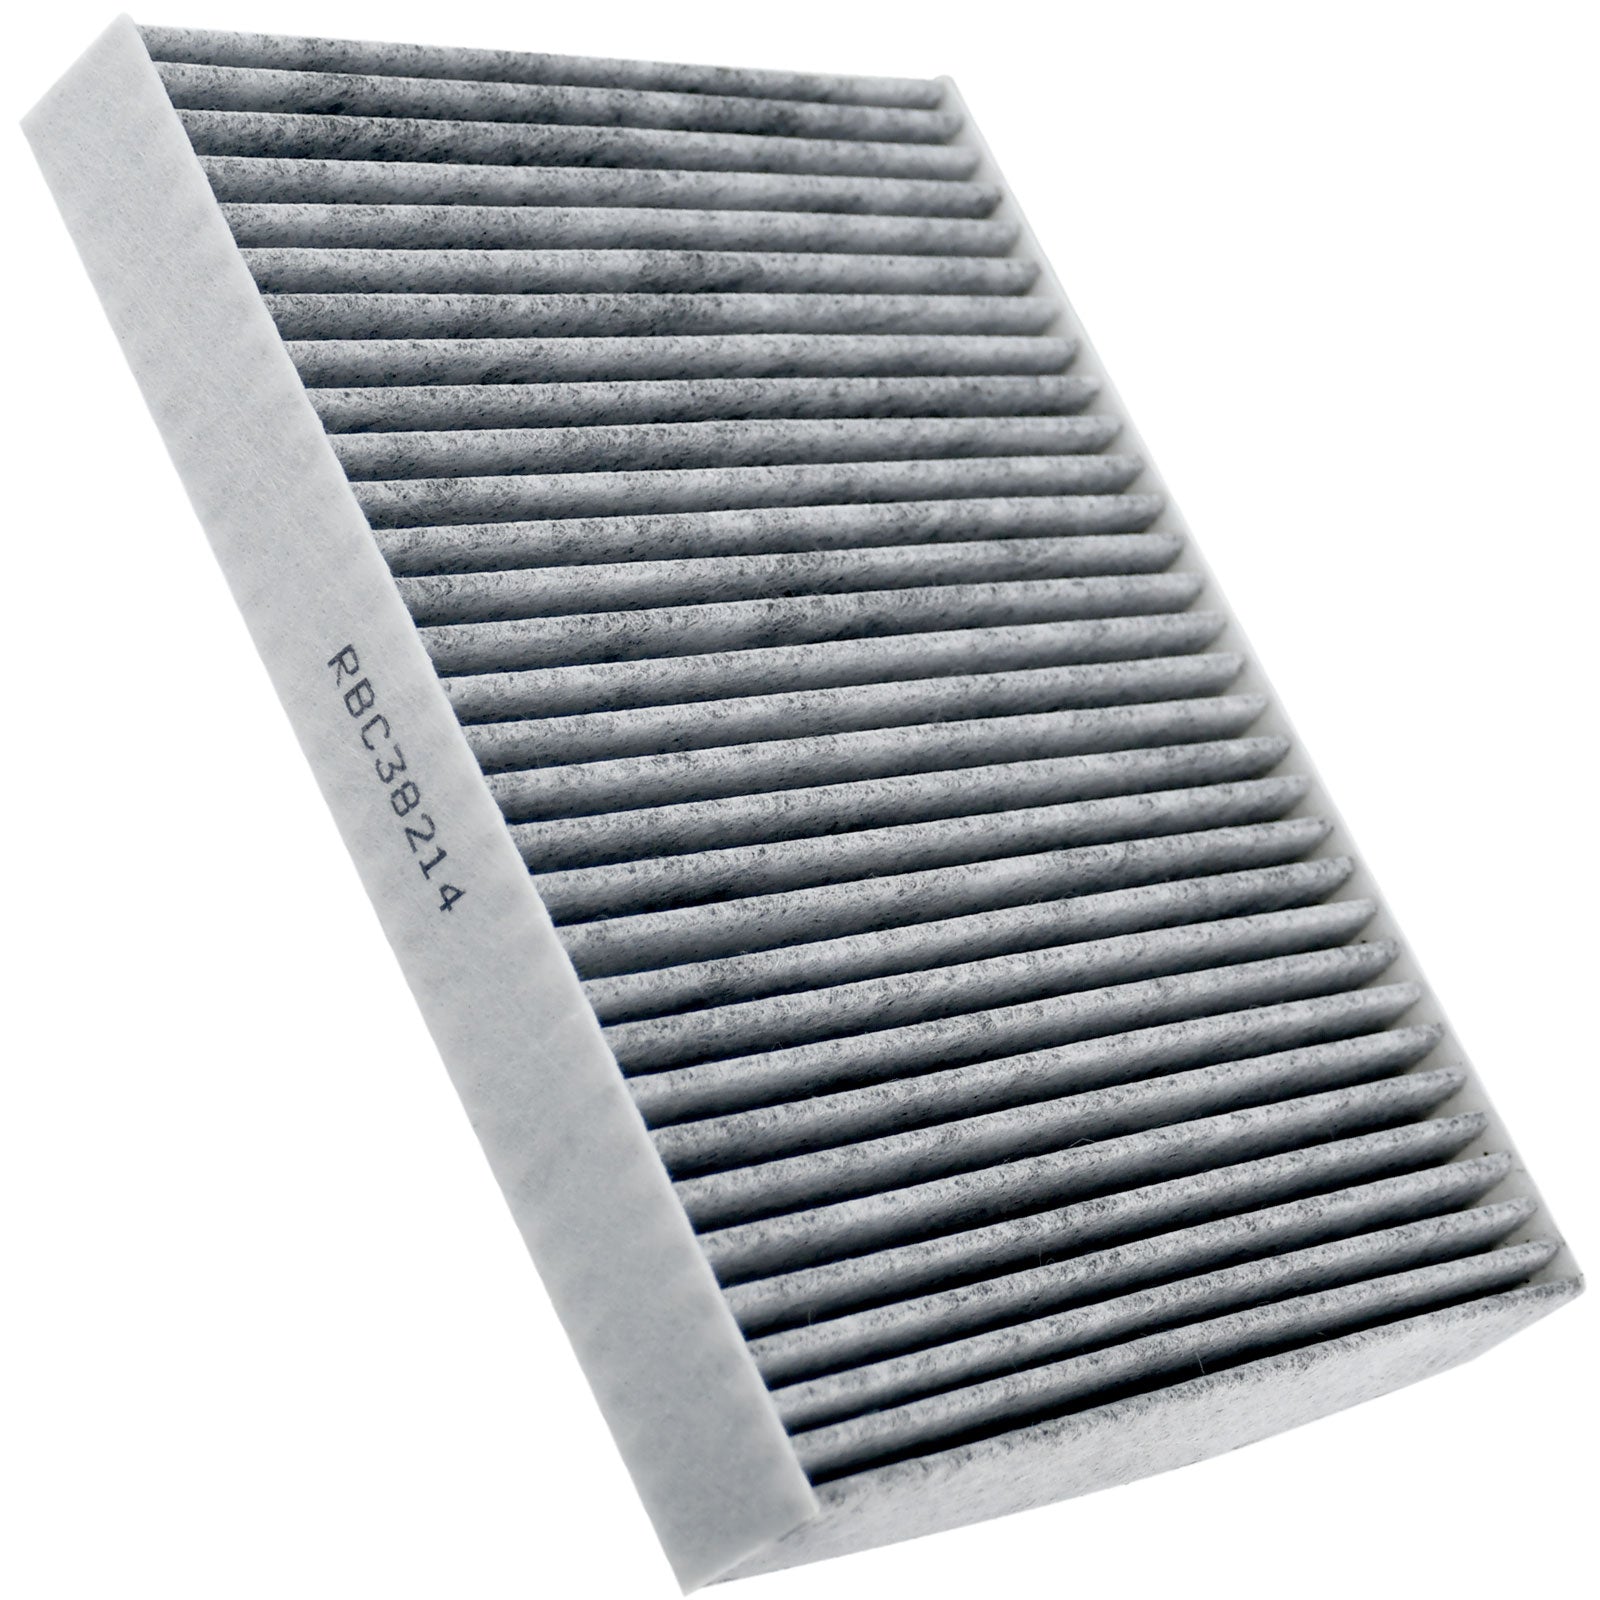 MotorbyMotor C38214 (CF12150) Cabin Air Filter for Ford Expedition F-150 F-250 F-350 F-450 F-550 Super Duty, Lincoln Navigator Premium Air Filter, 256mm x 205mm x 30mm Car Air Filter MotorbyMotor